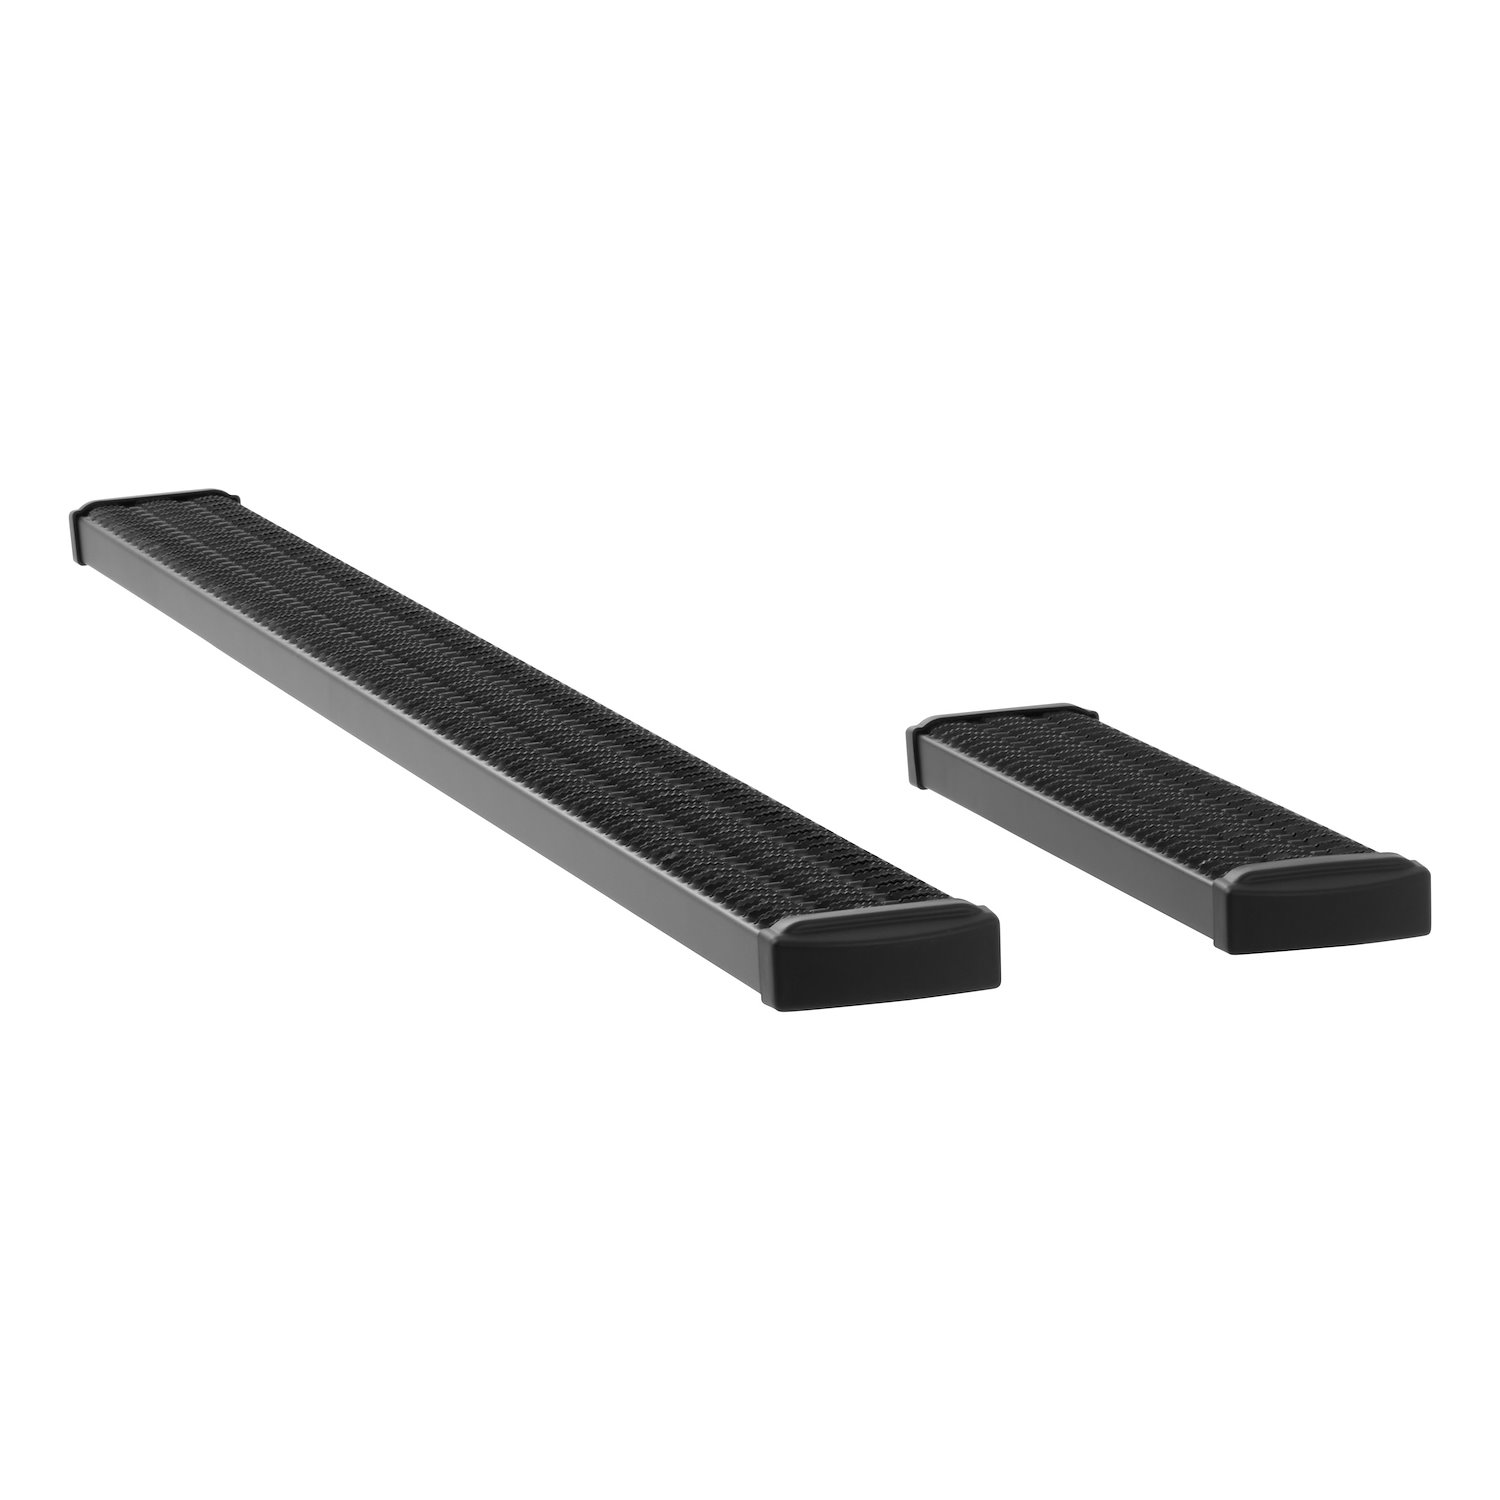 415100-401724 Grip Step 7 in. x 36 in., 100 in. Black Aluminum Running Boards Fits Select Ford Transit